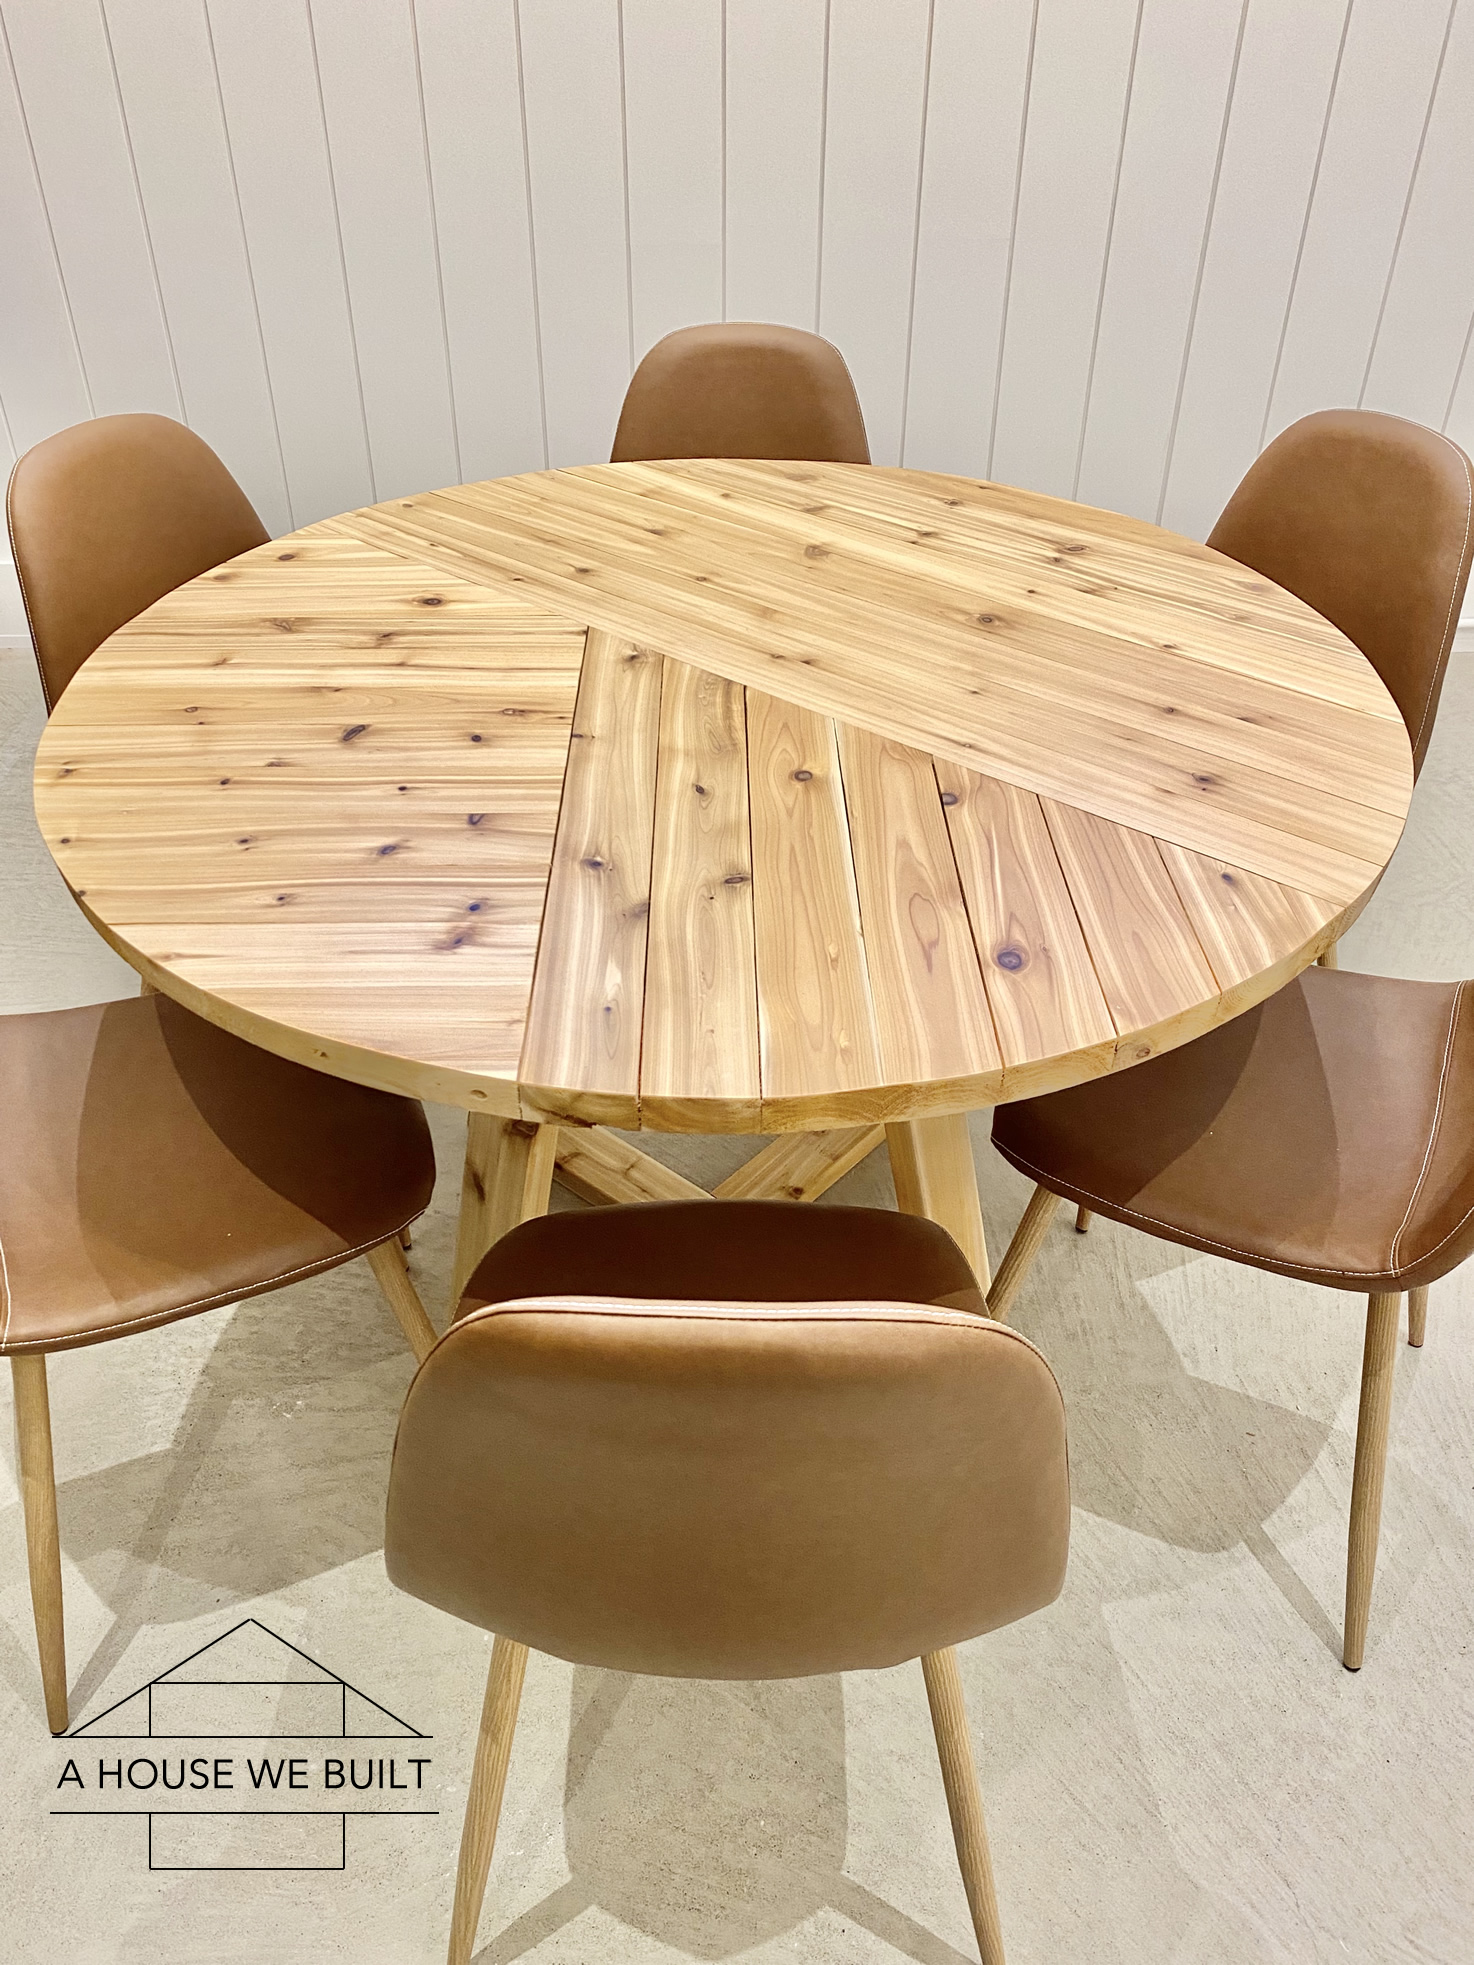 How To Build A Round Table